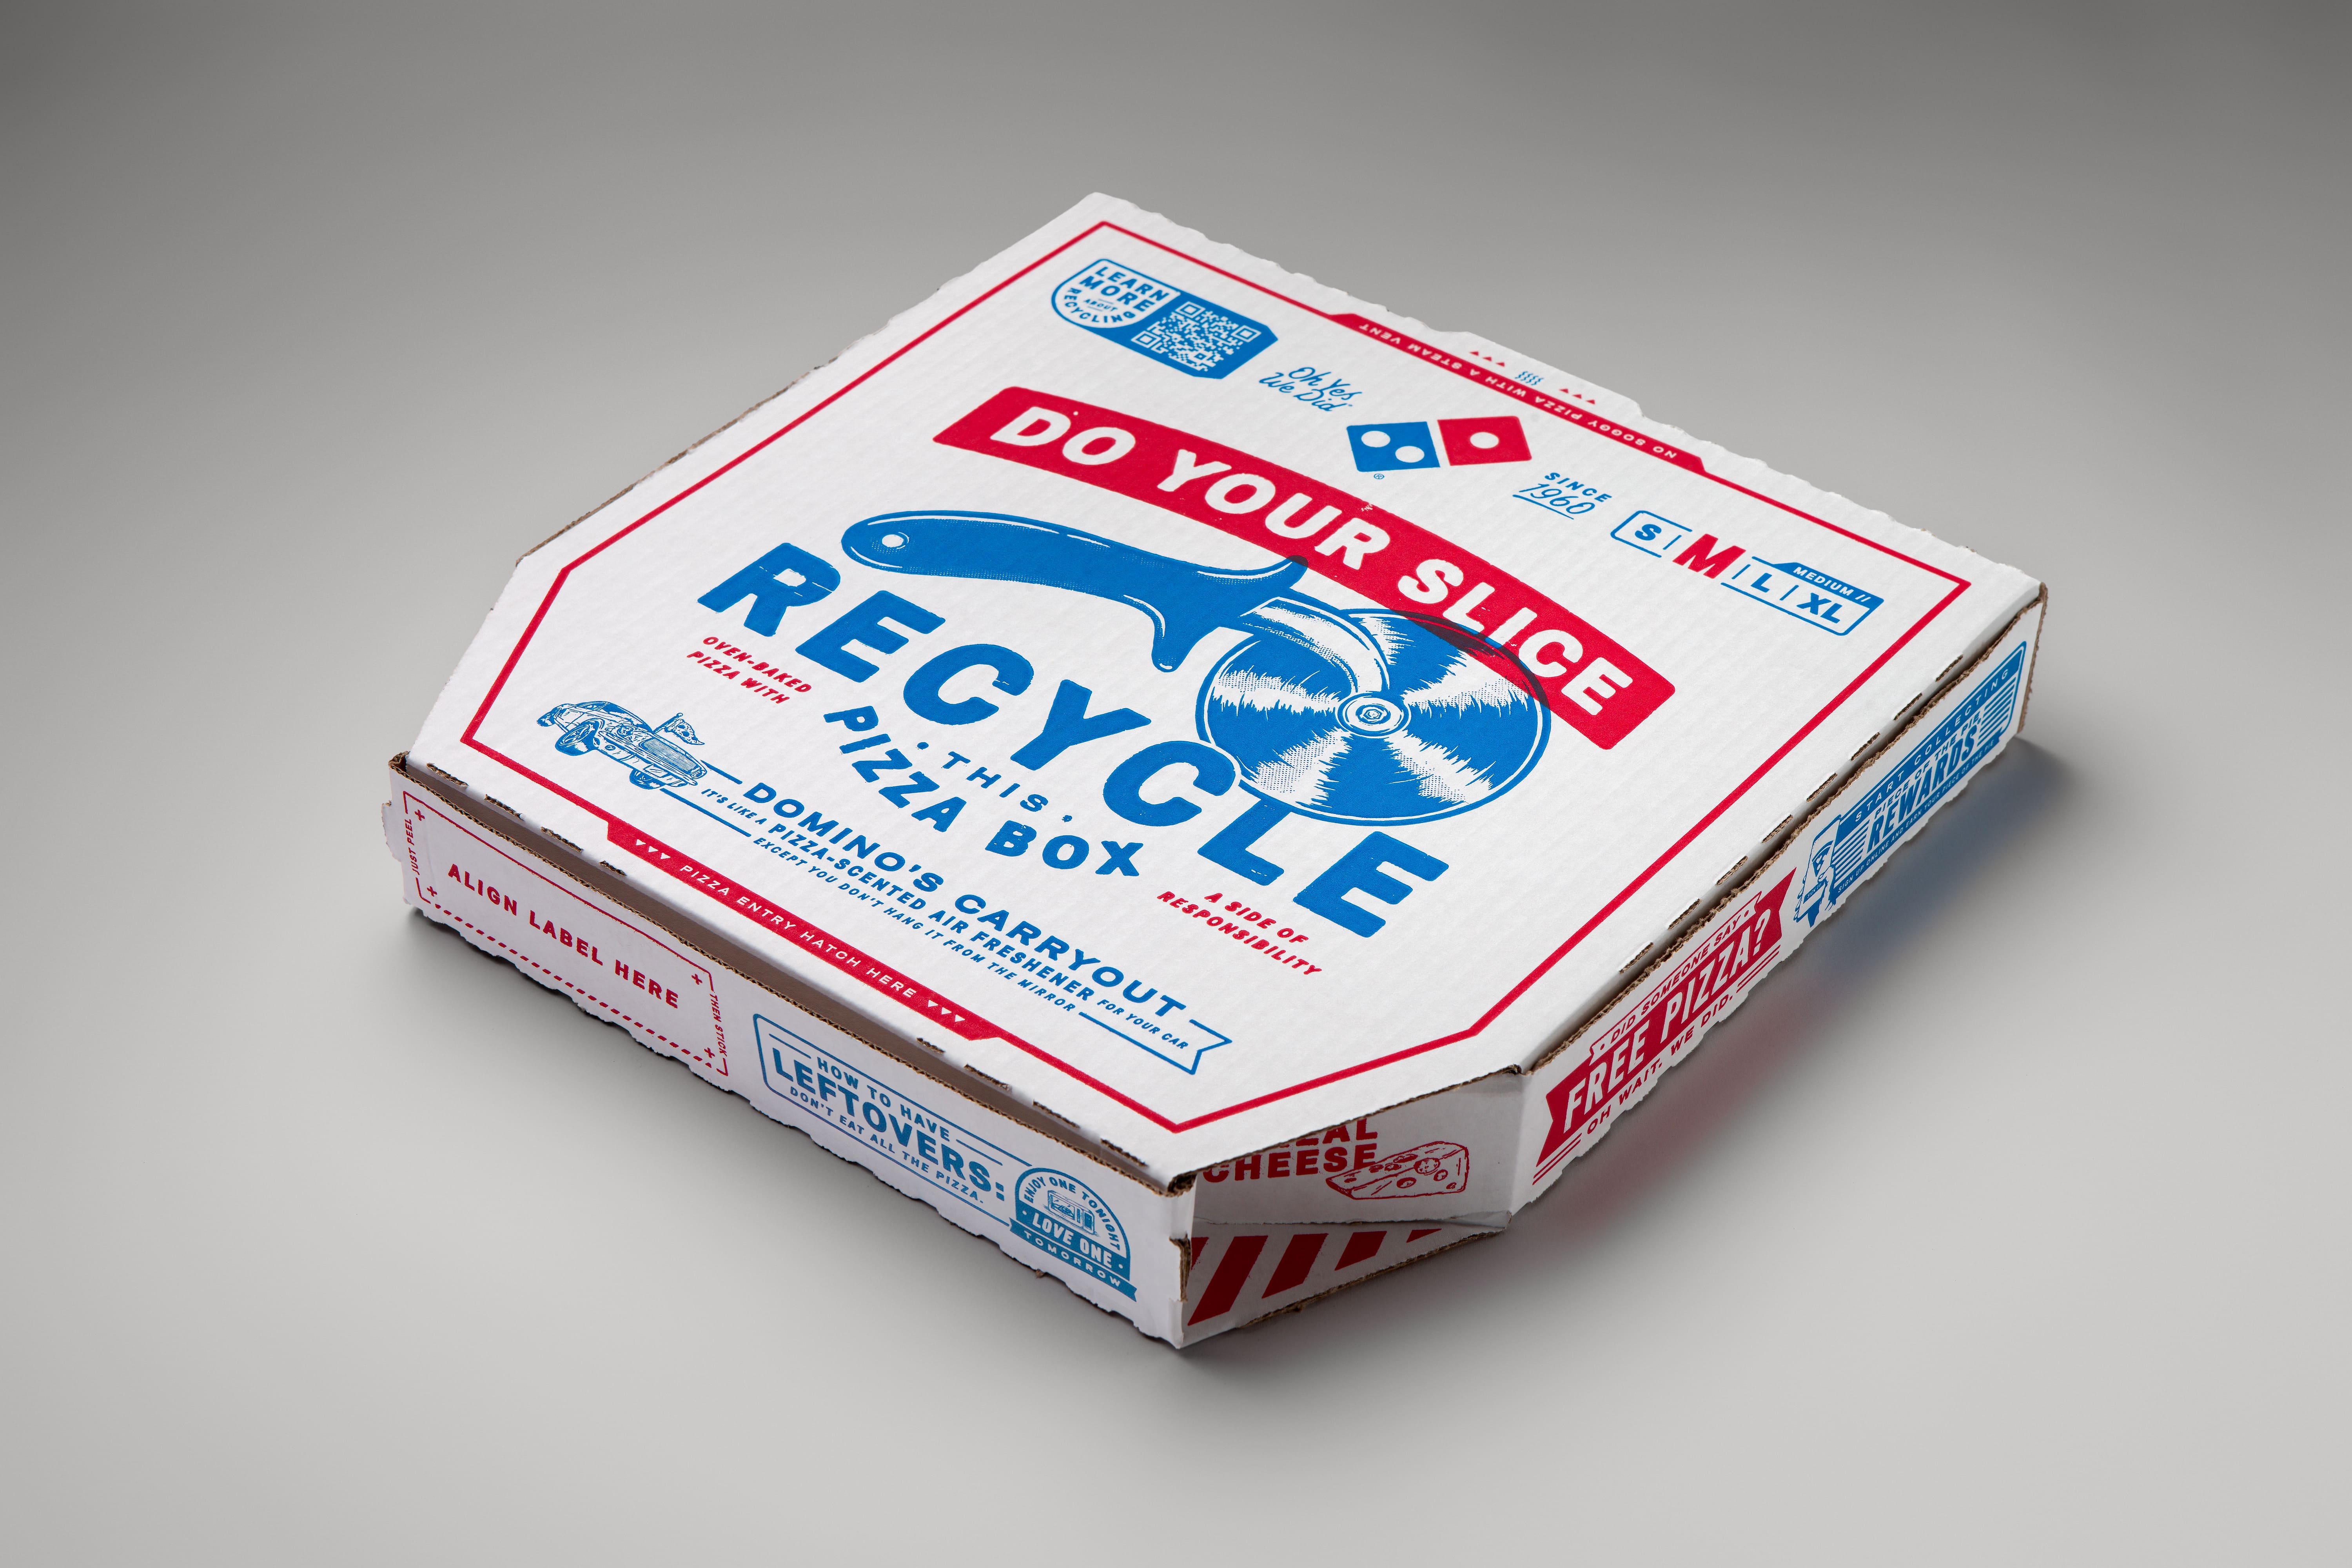 Dominos pizza box recycling